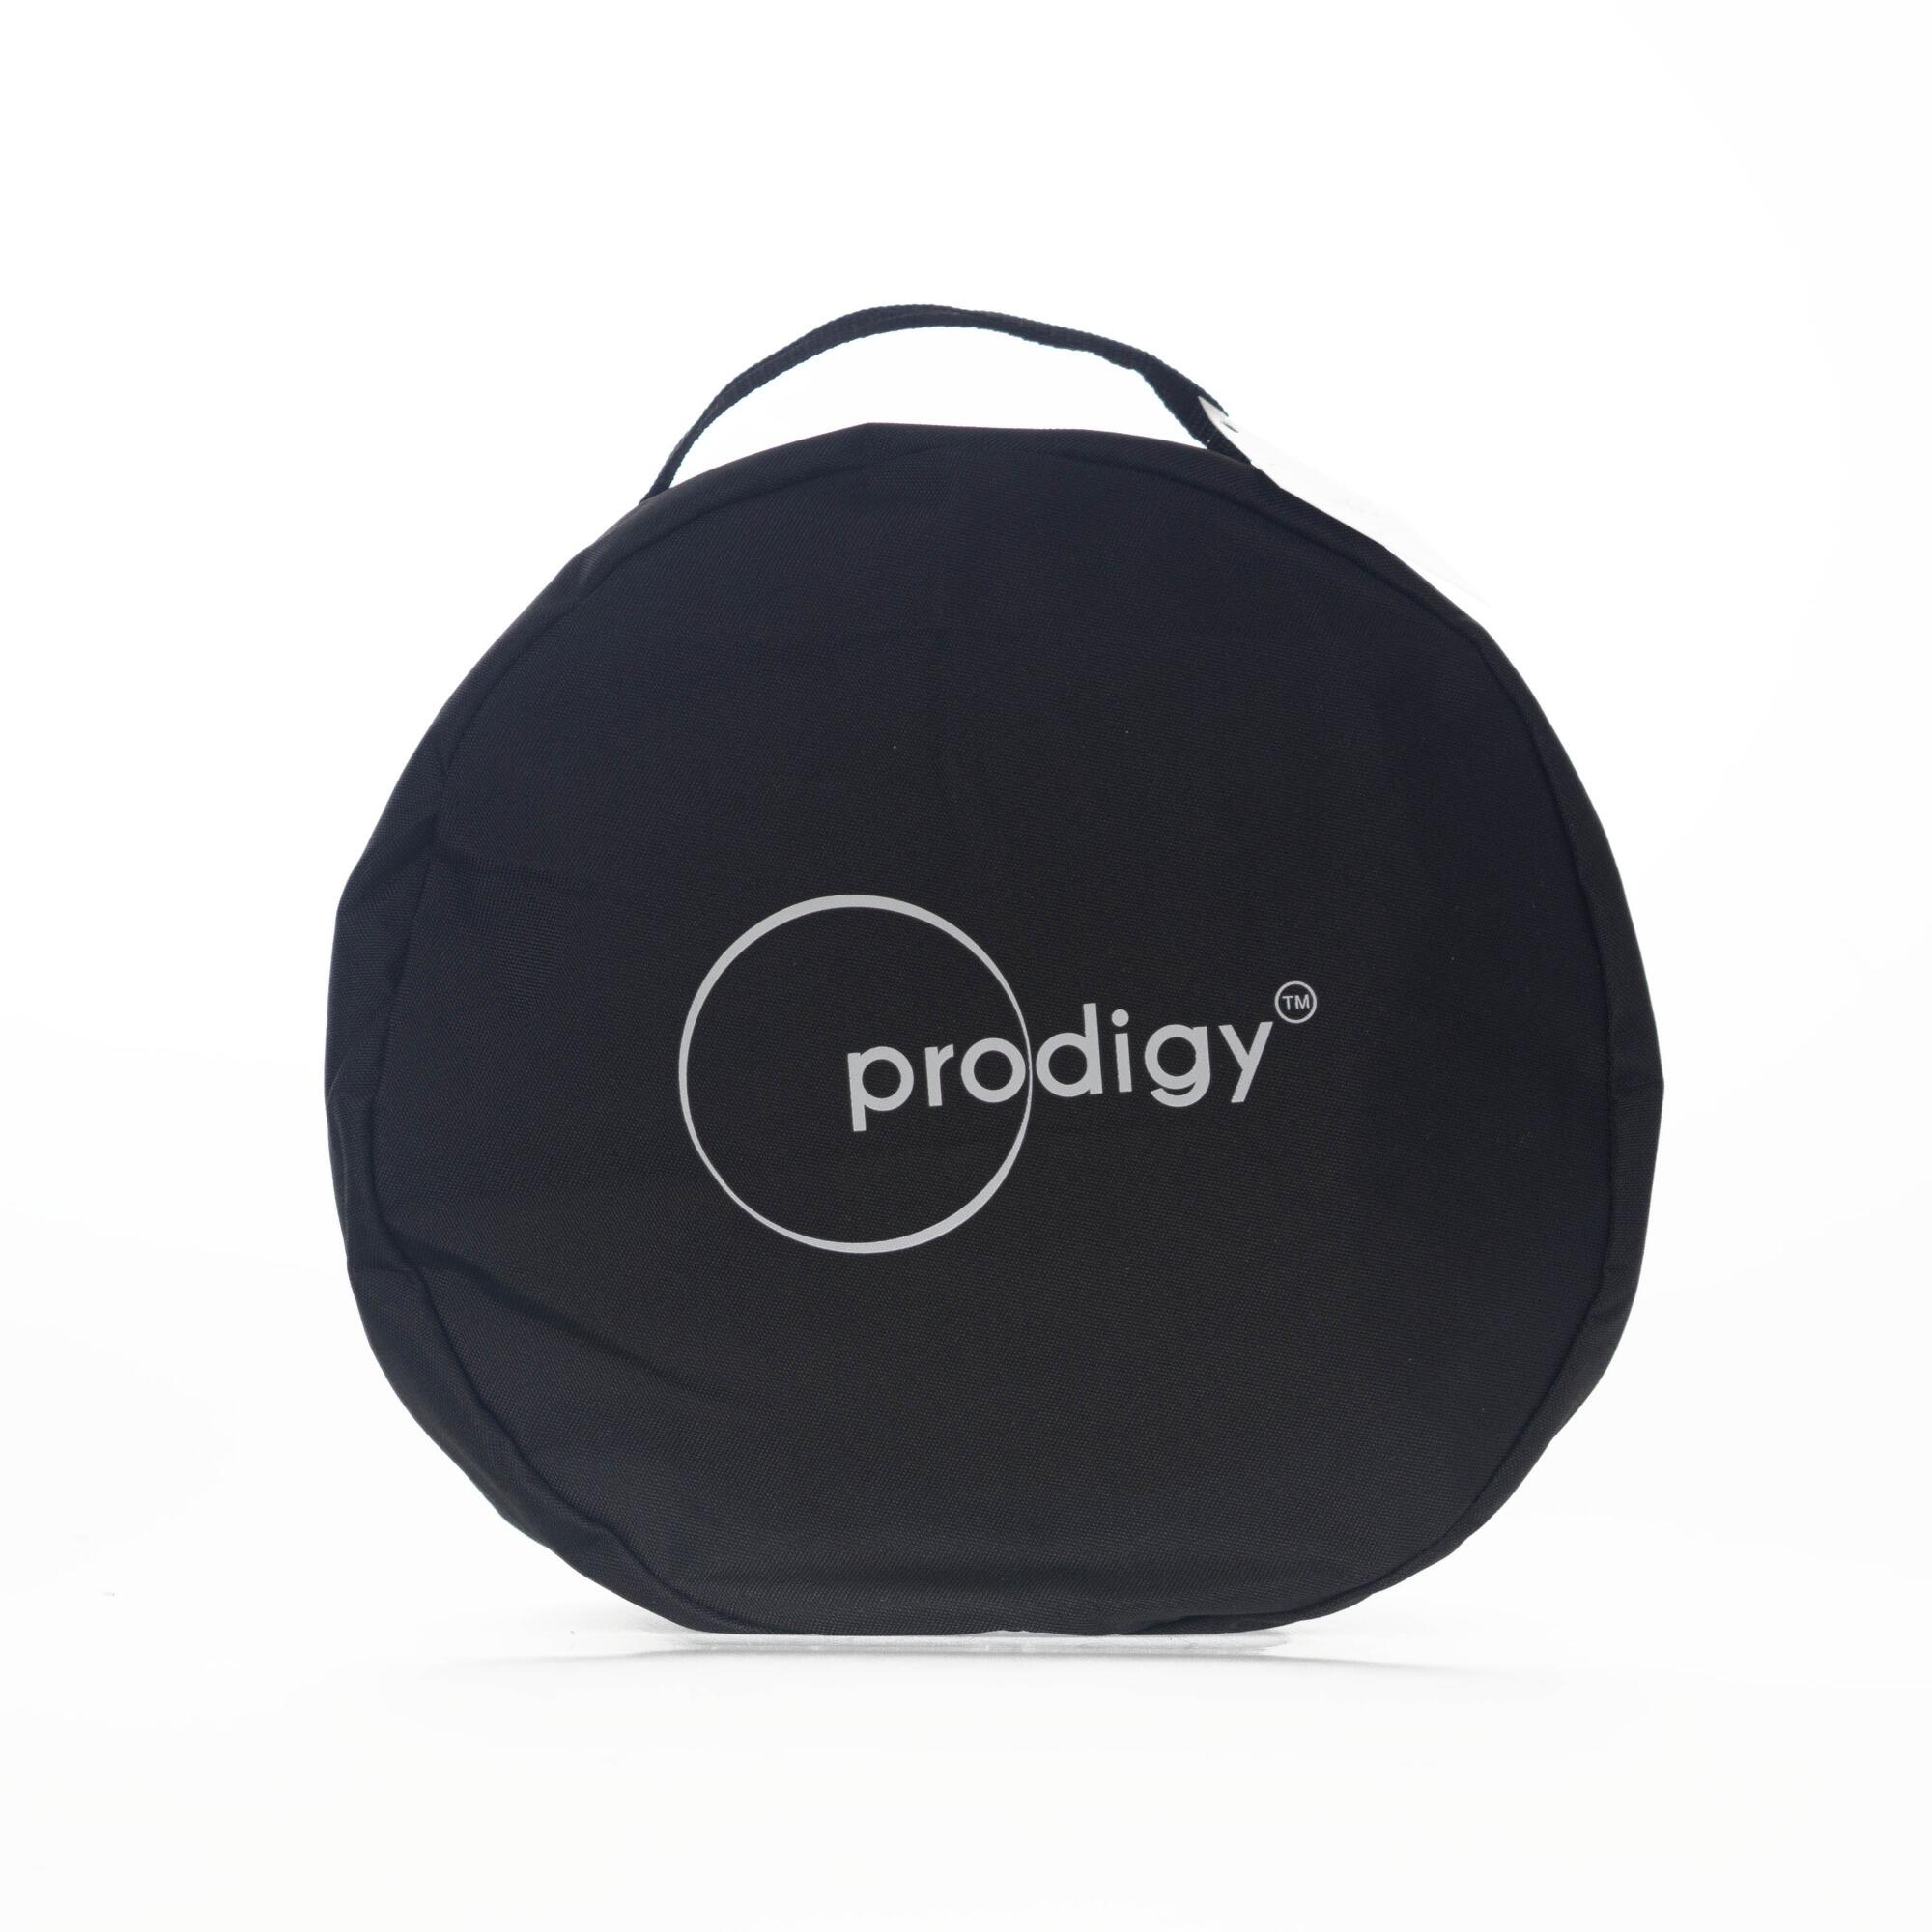 6m Prodigy Aerial Fabric for Hammocks -Black with round Prodigy bag 3/5